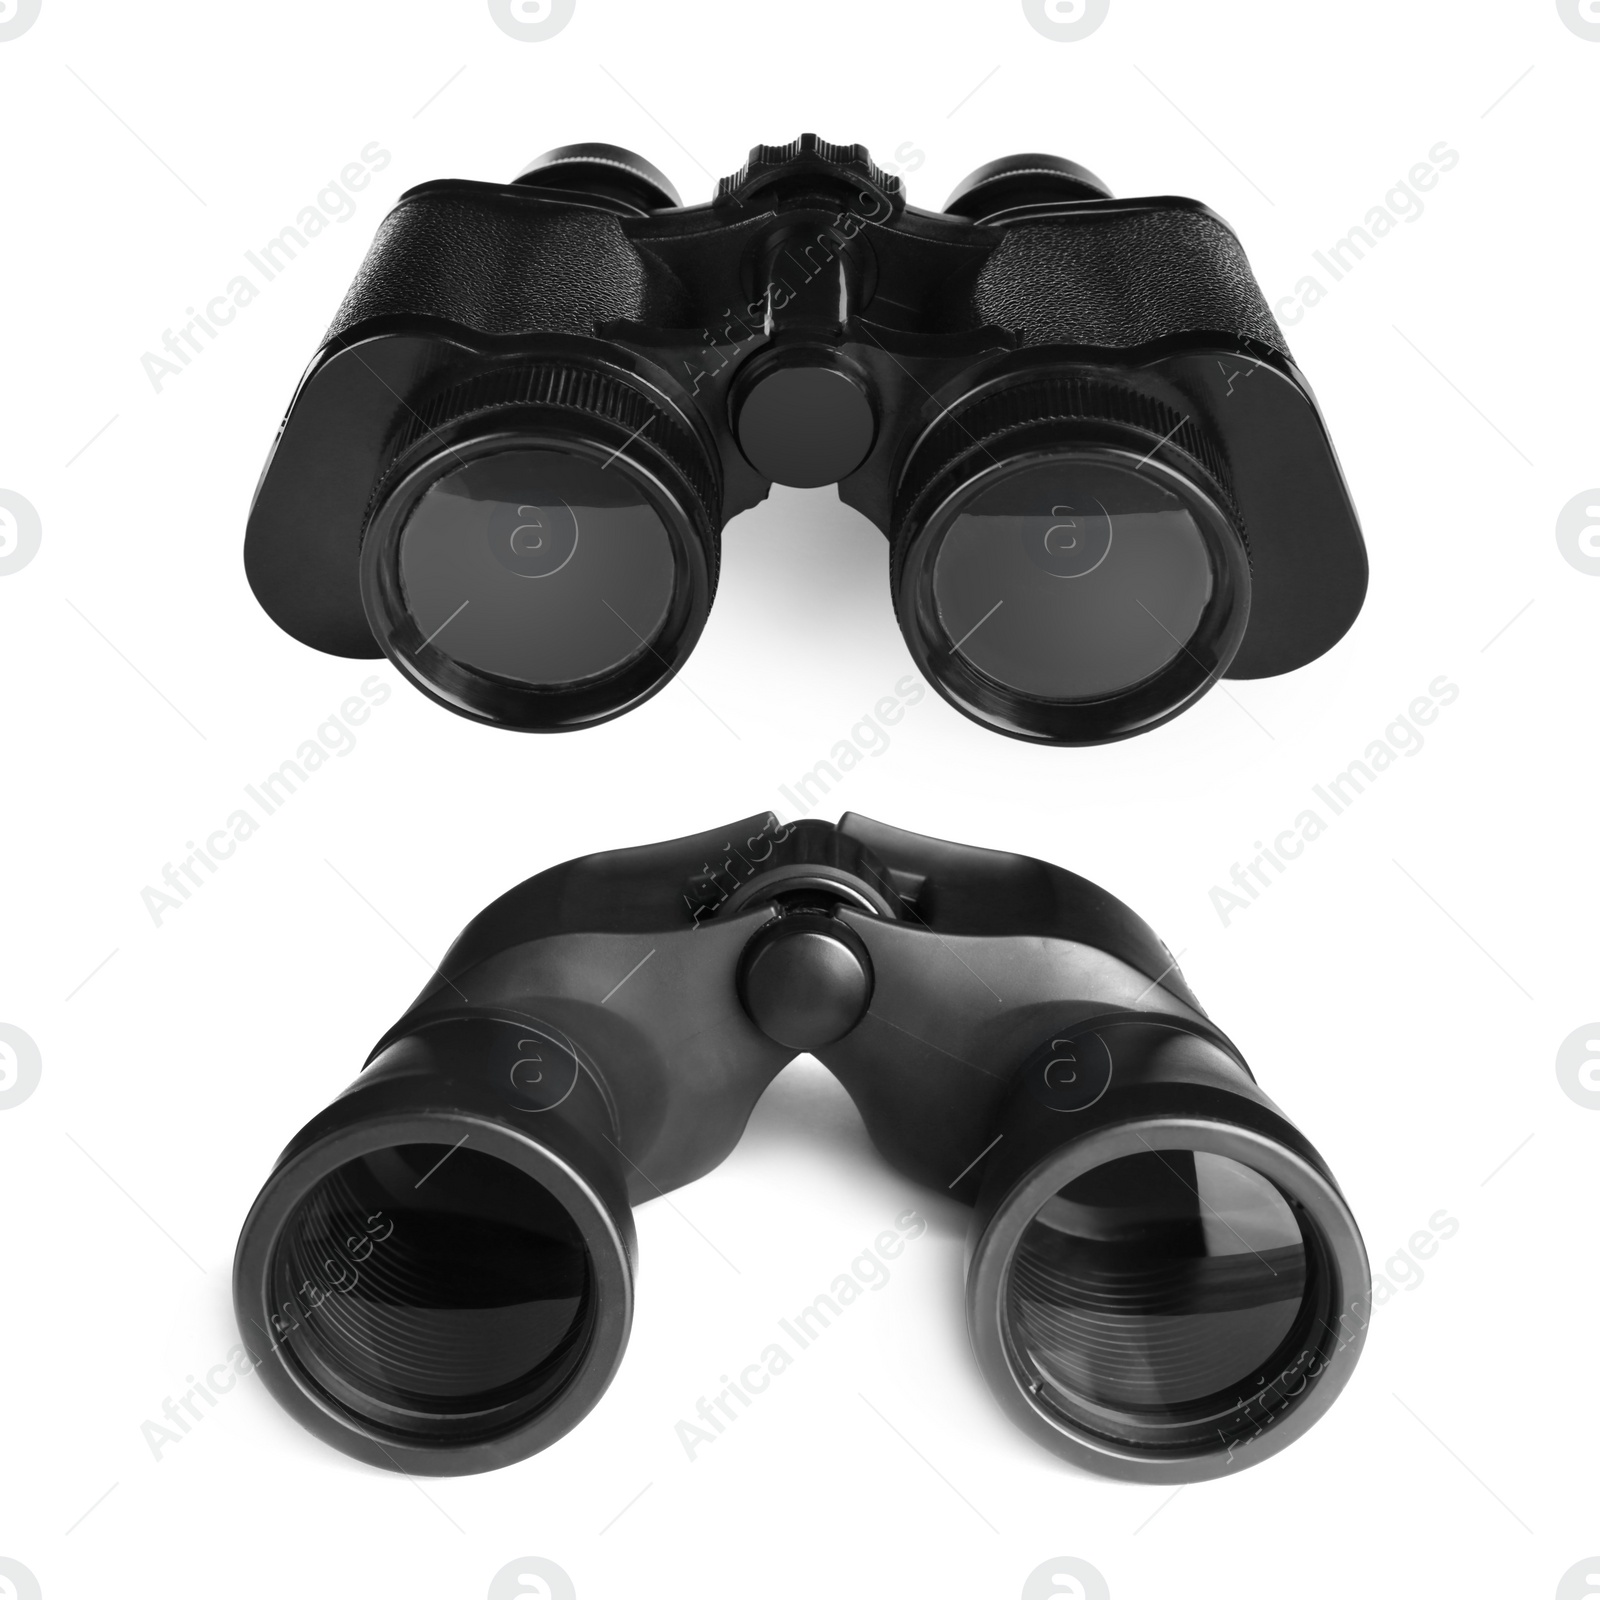 Image of Two different black binoculars on white background